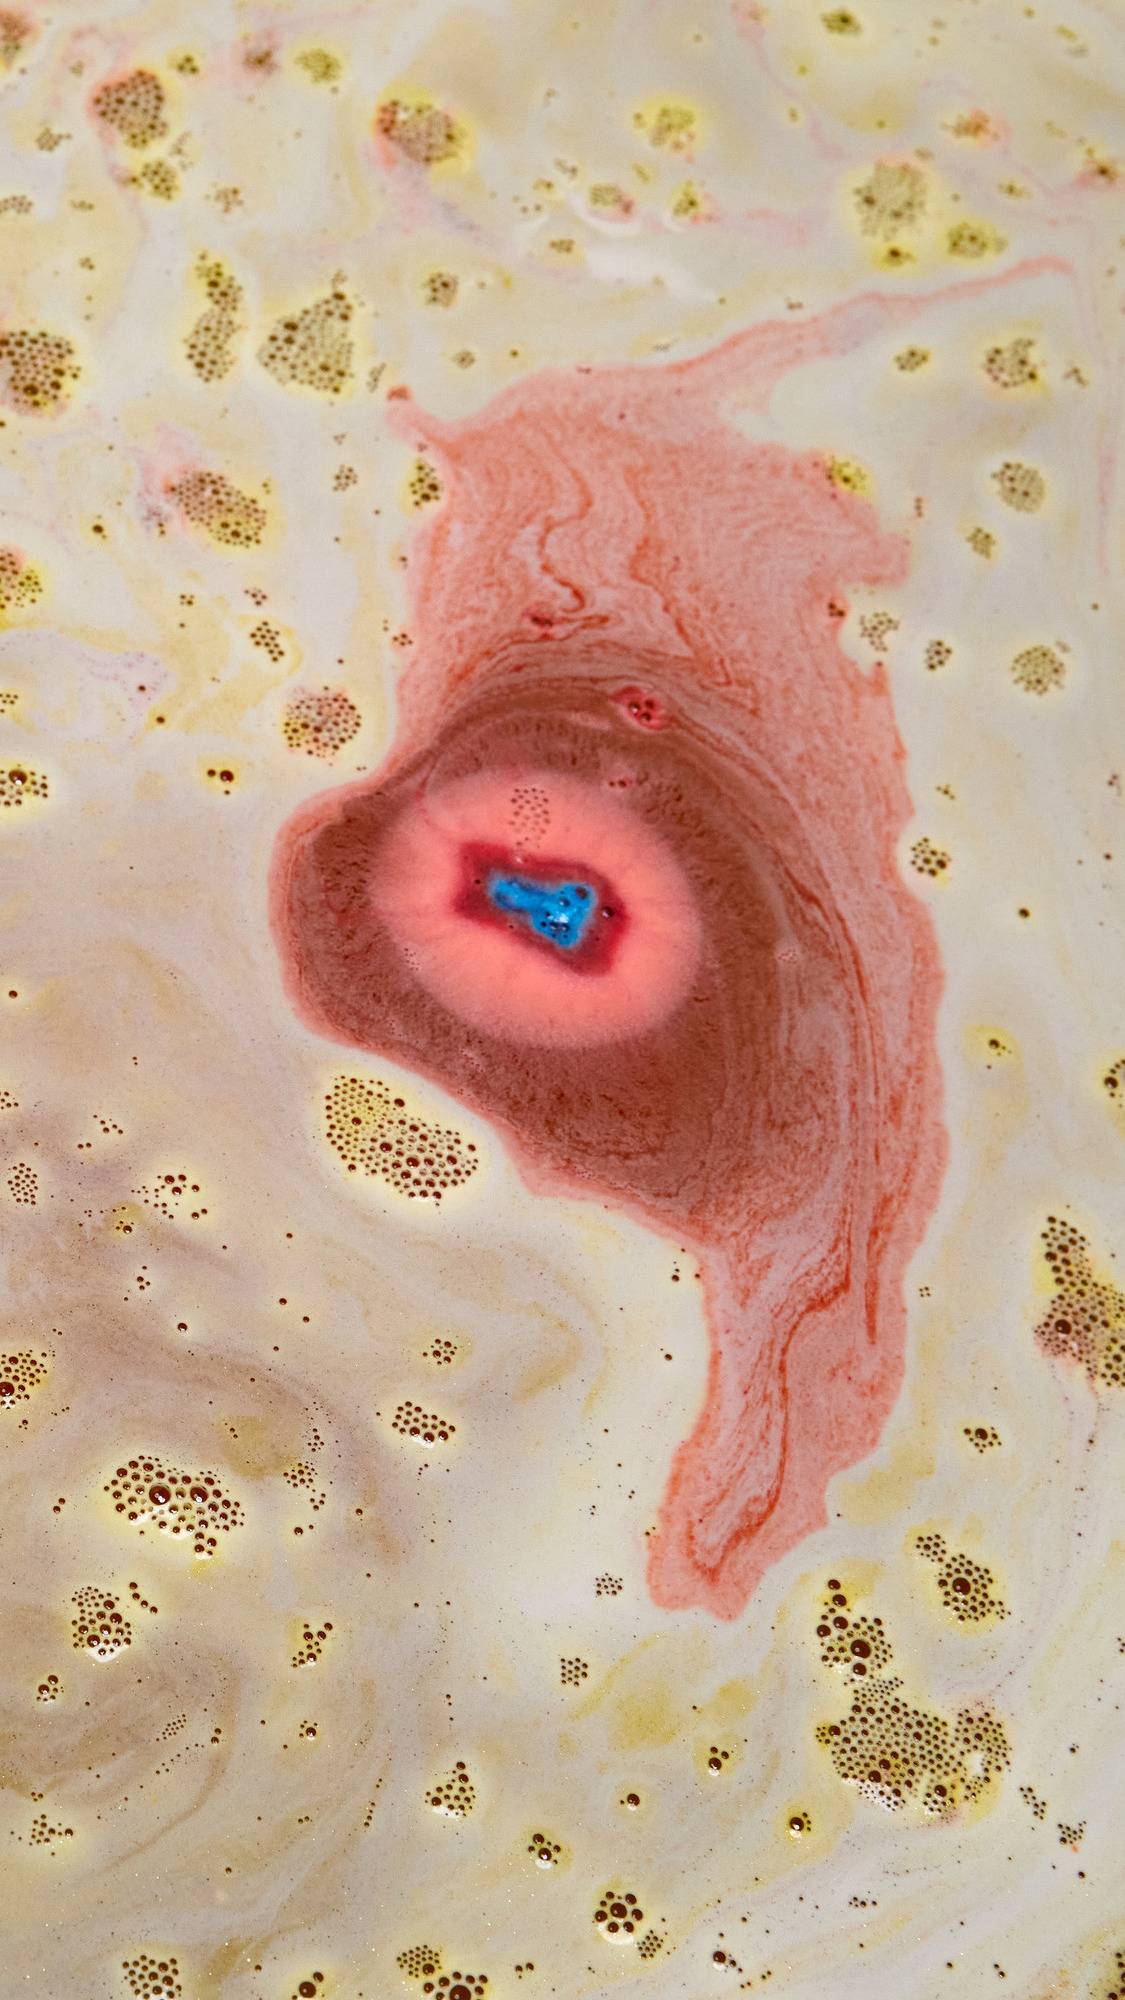 The Crackle bath bomb has almost fully dissolved in the bath leaving behind a sea of deep golden, shimmering water. The centre is a deep red colour with a pop of blue.